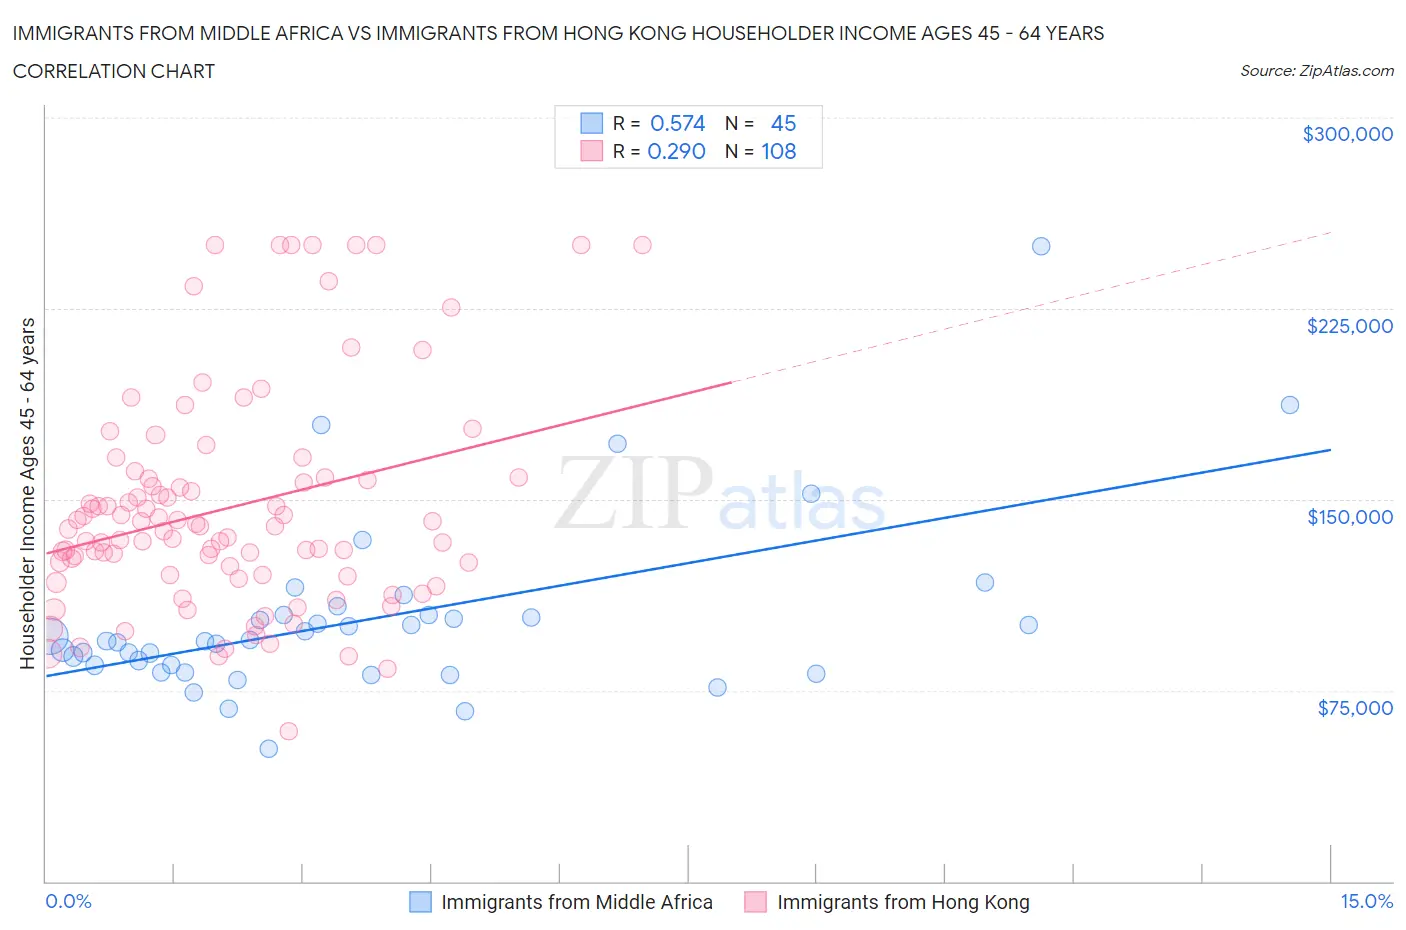 Immigrants from Middle Africa vs Immigrants from Hong Kong Householder Income Ages 45 - 64 years